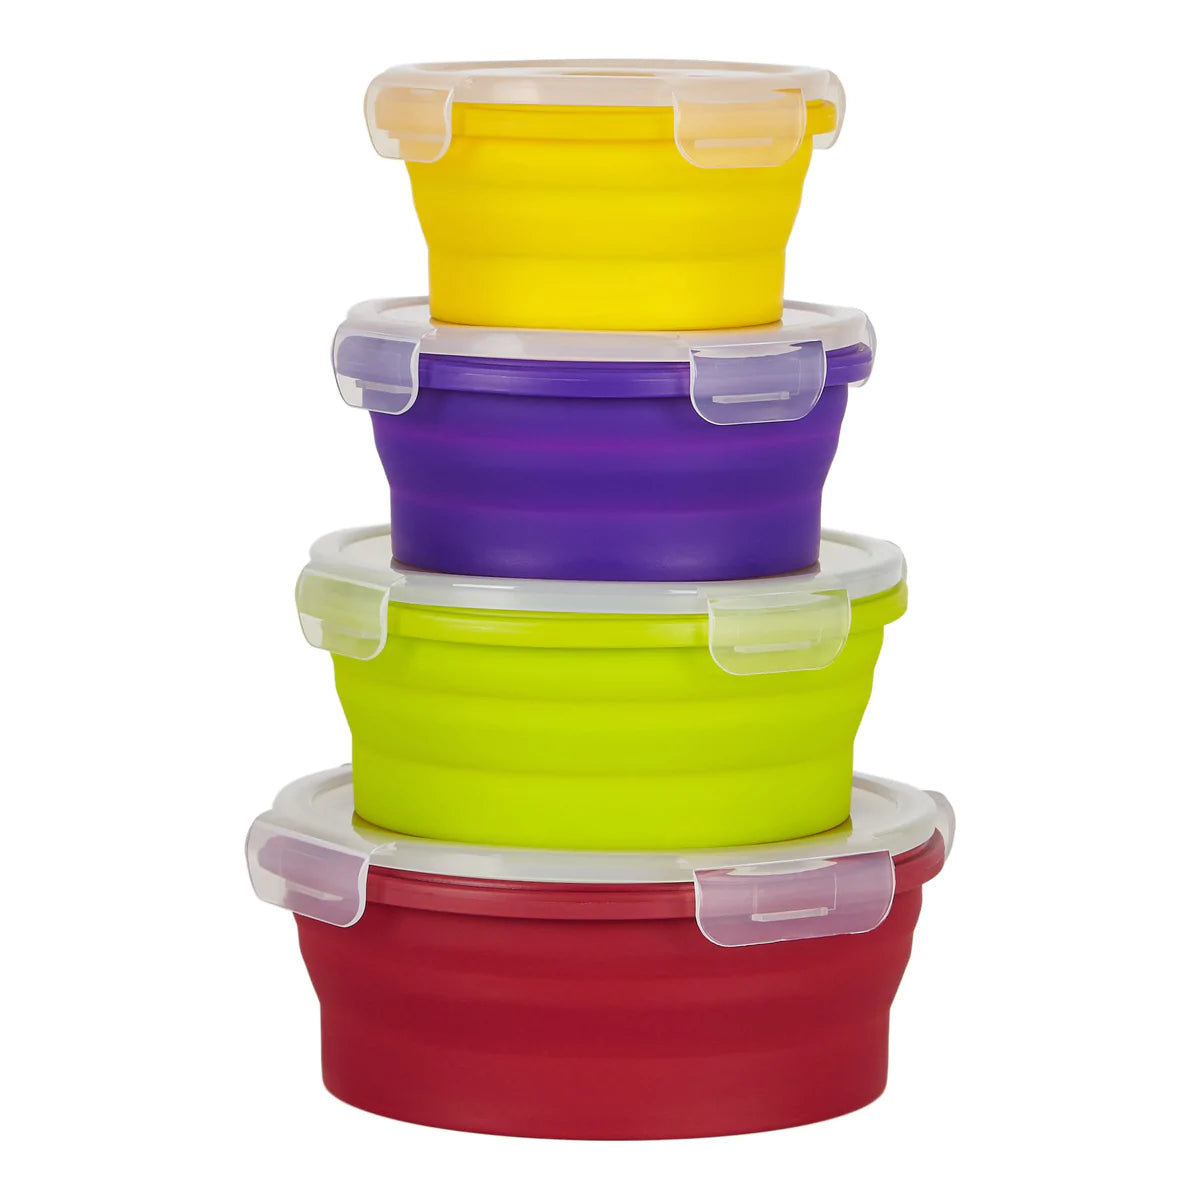 ICHC Set of 4 Collapsible Food Storage Containers - Space Saving Food  Silicone Containers, Flat Stacks, Travel Containers, Airtight Lunch Box  With